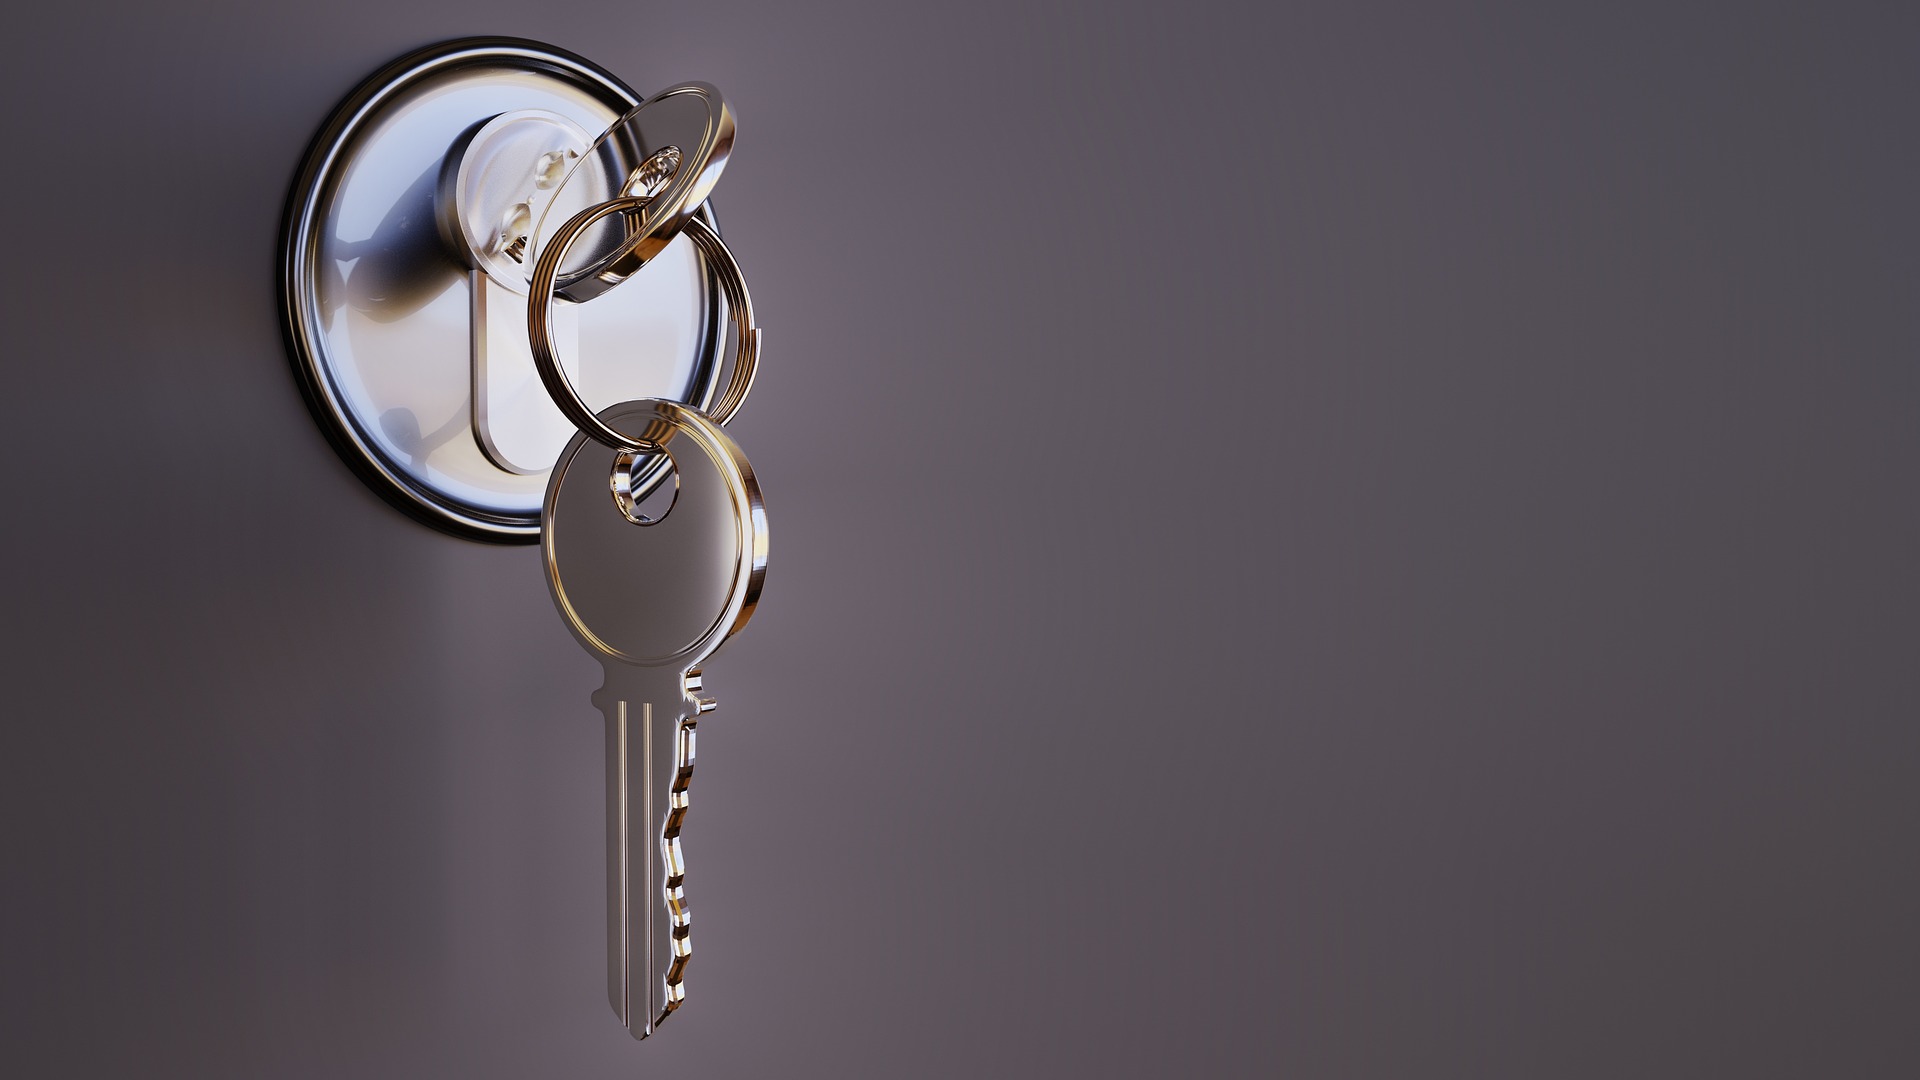 Apartment security tips you should know about